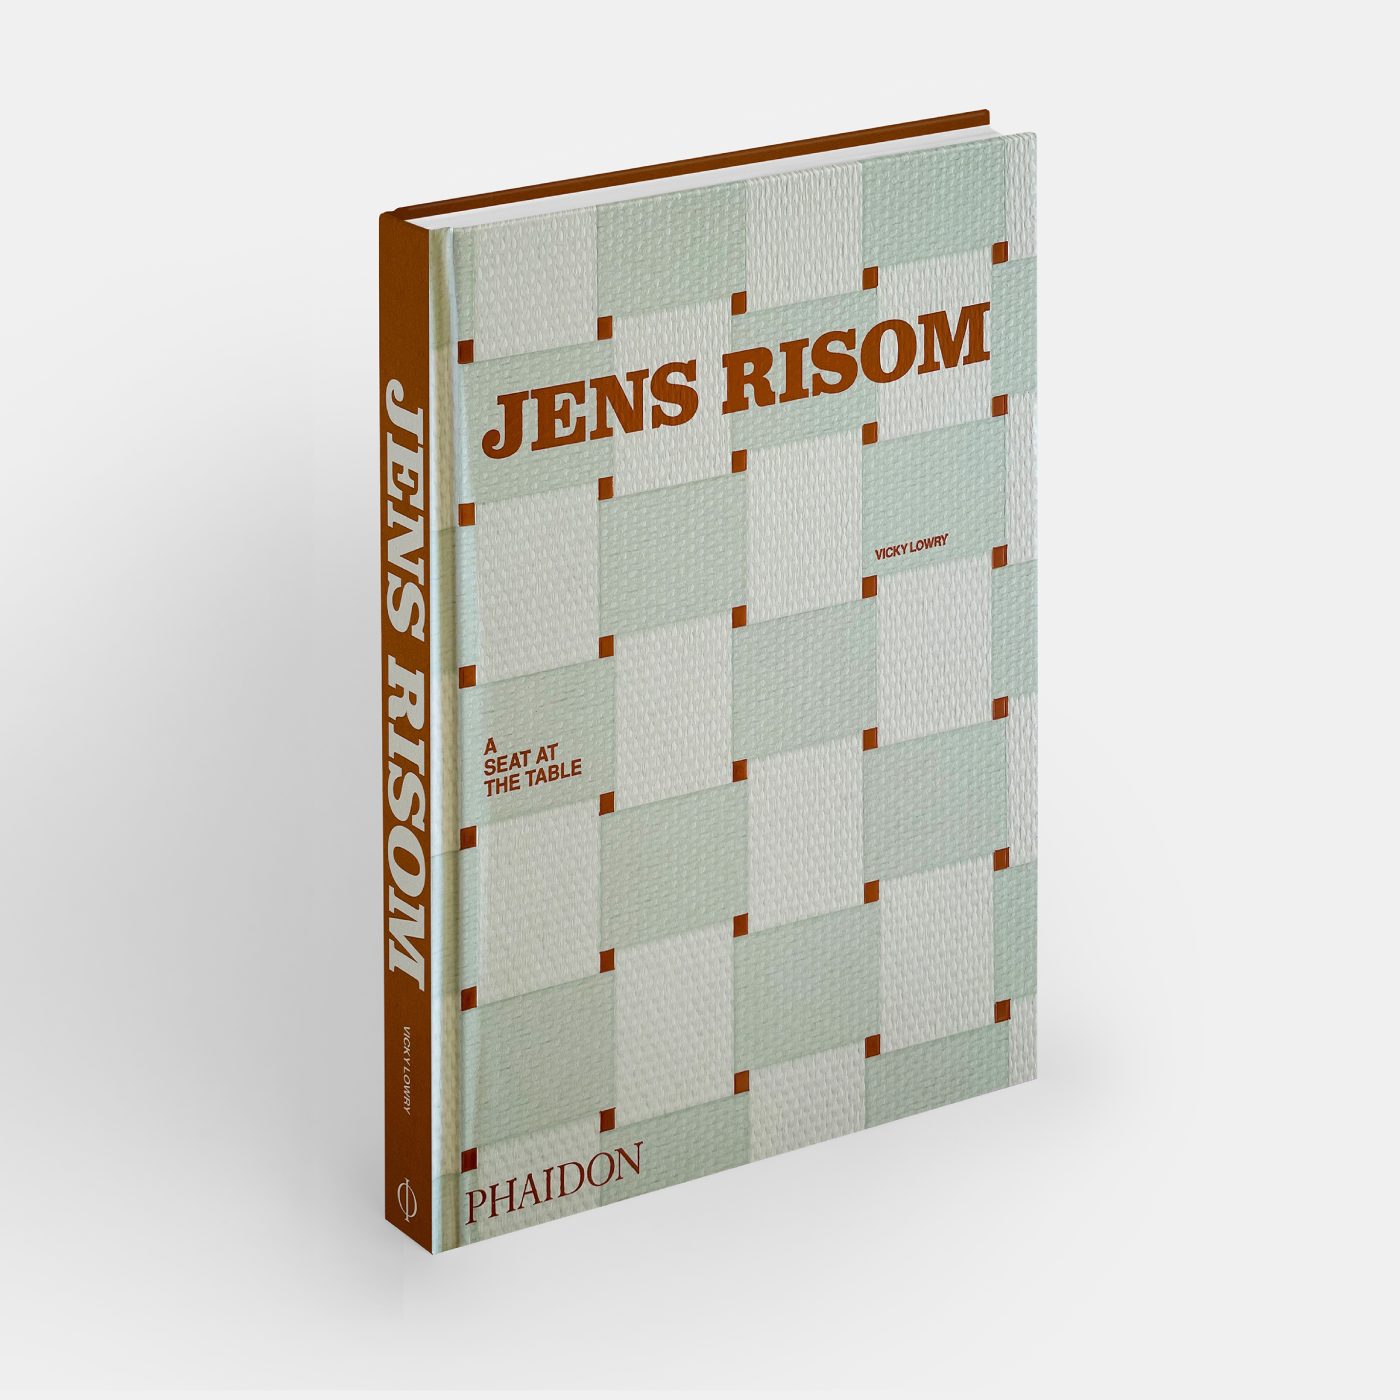 Front cover of Jens Risom: A Seat At The Table, by Vicky Lowry